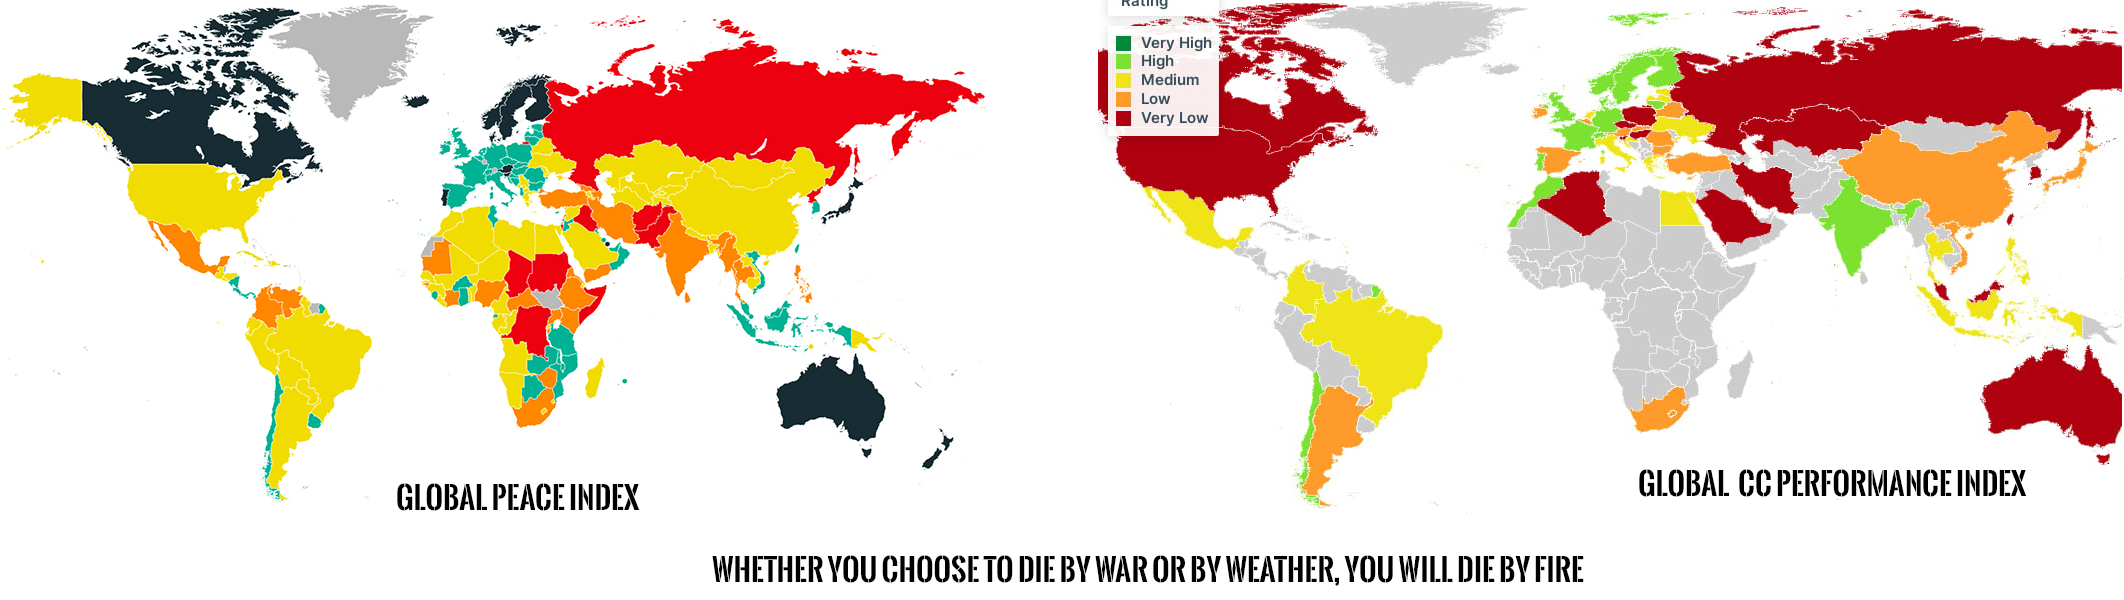 War or weather, take your pick